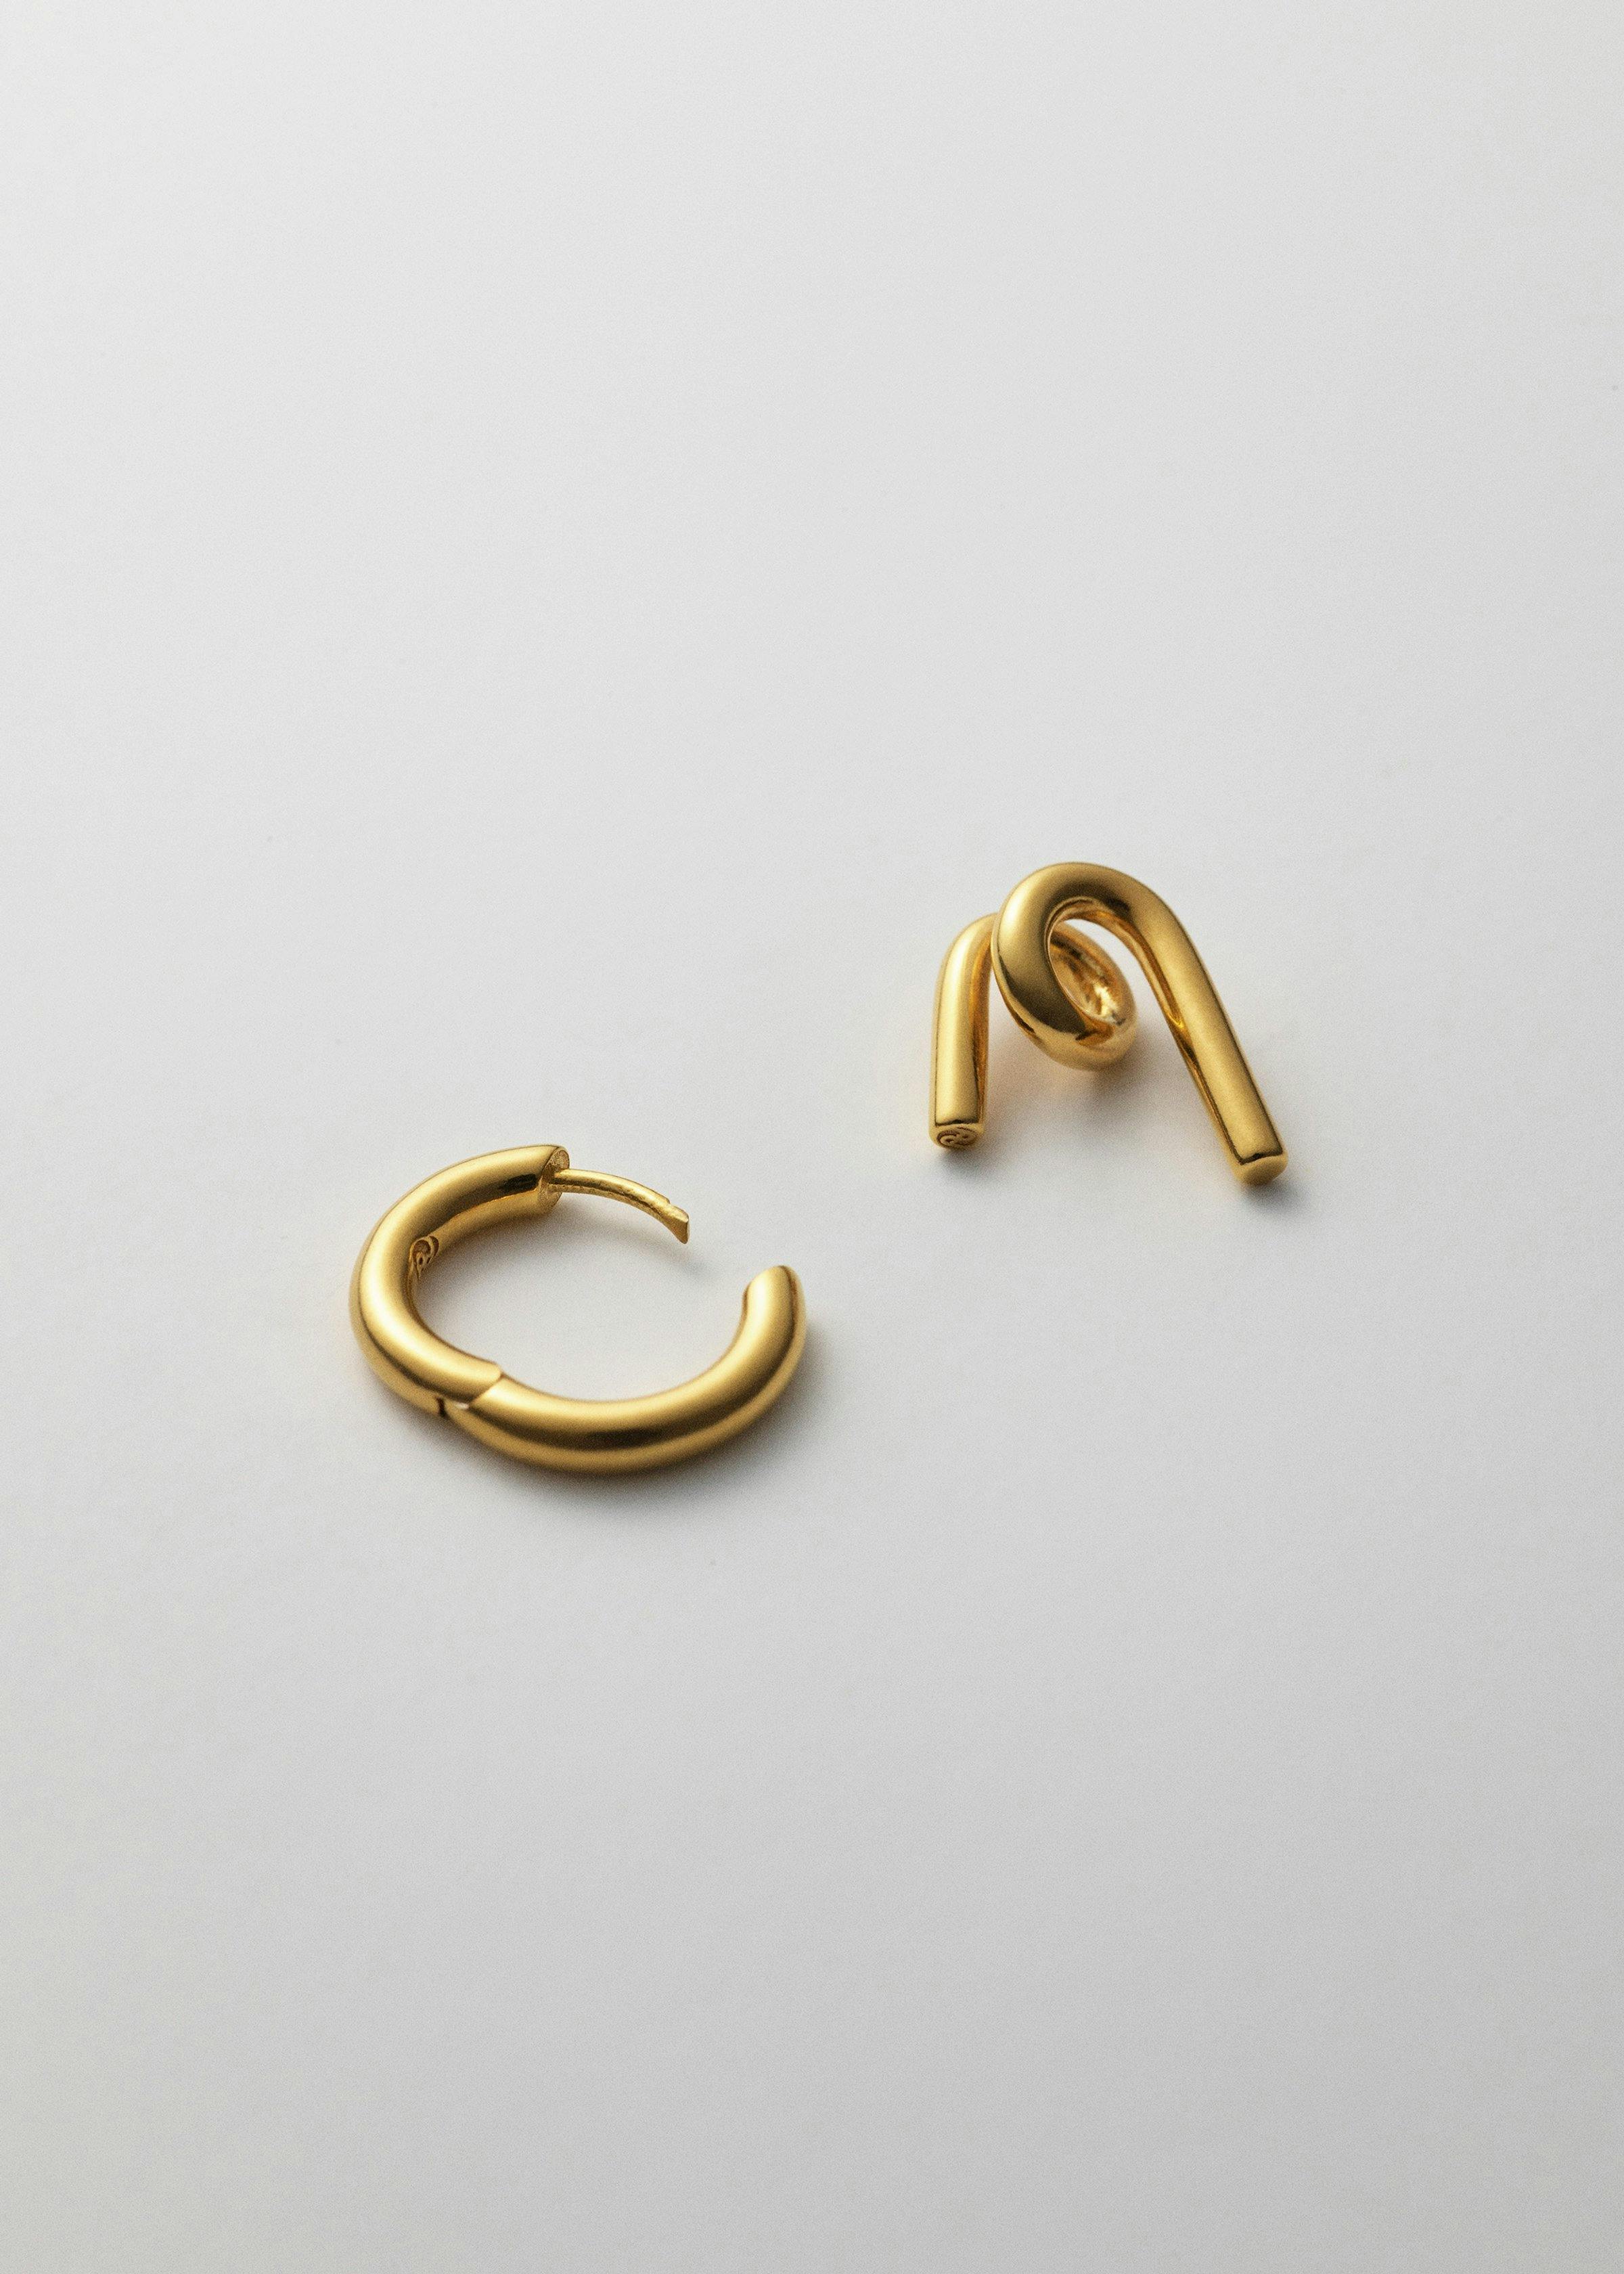 System earring wire